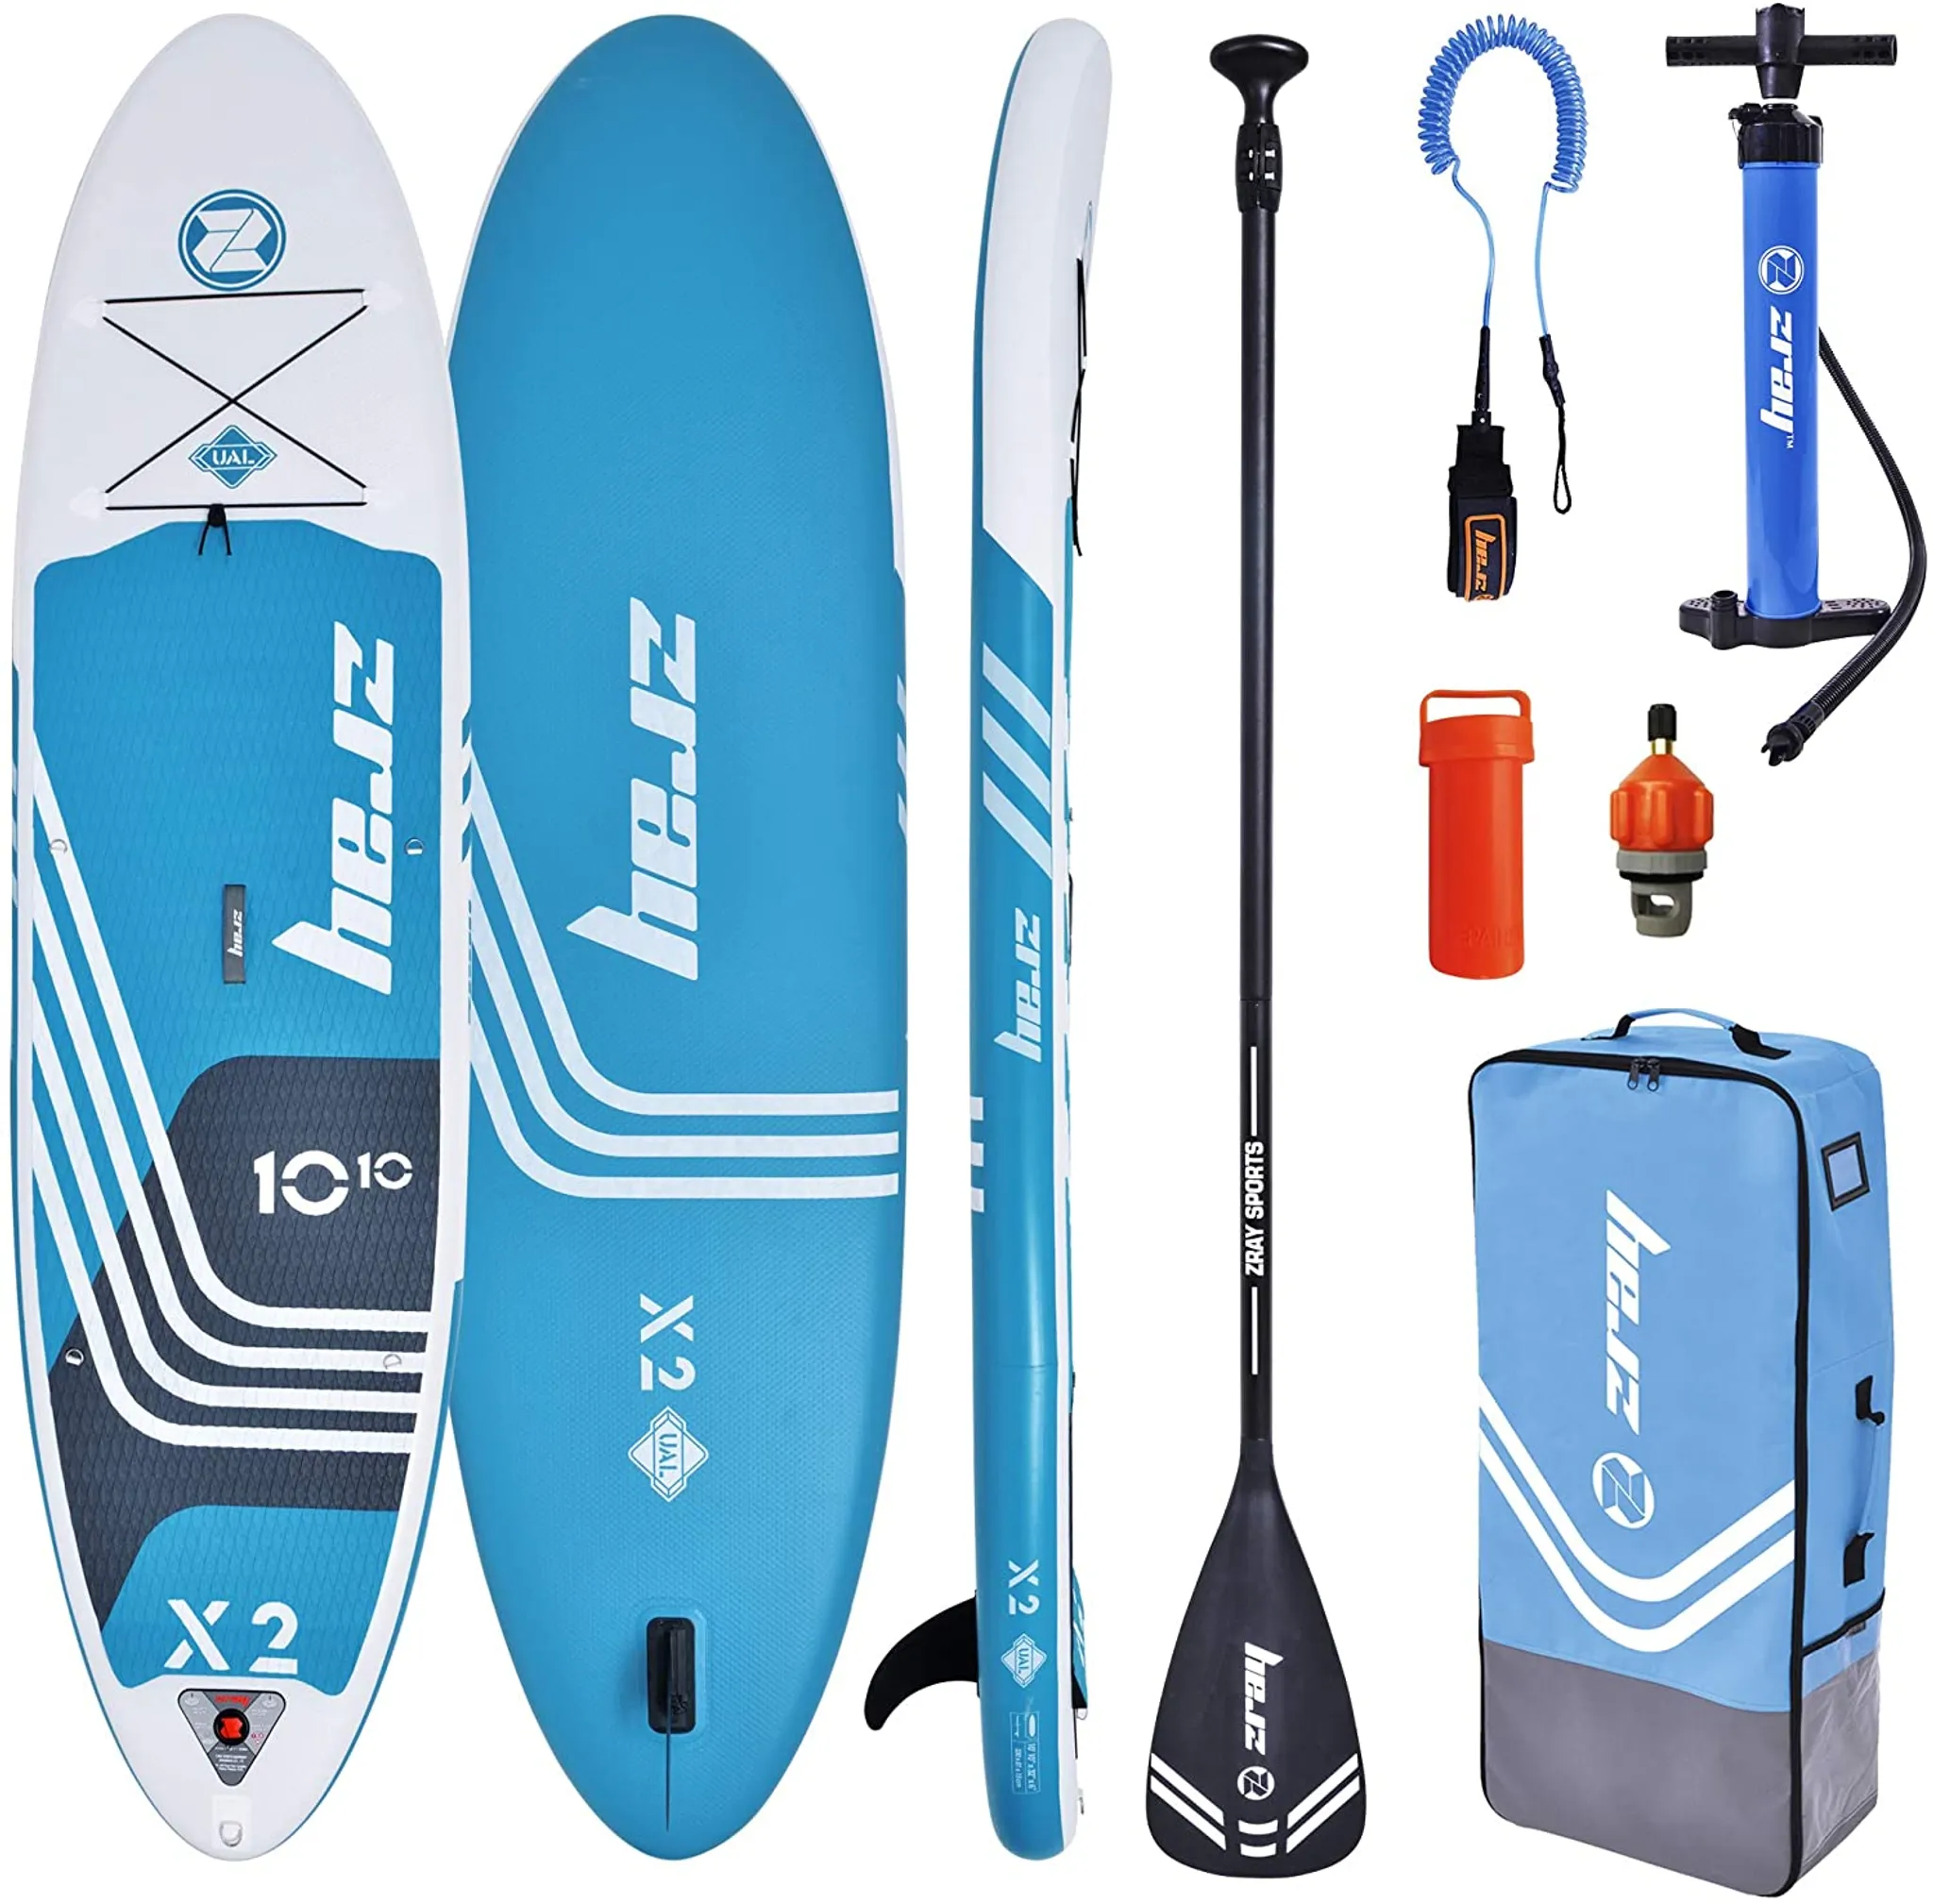 Zray X2 10.10 SUP Board Stand Up Paddle